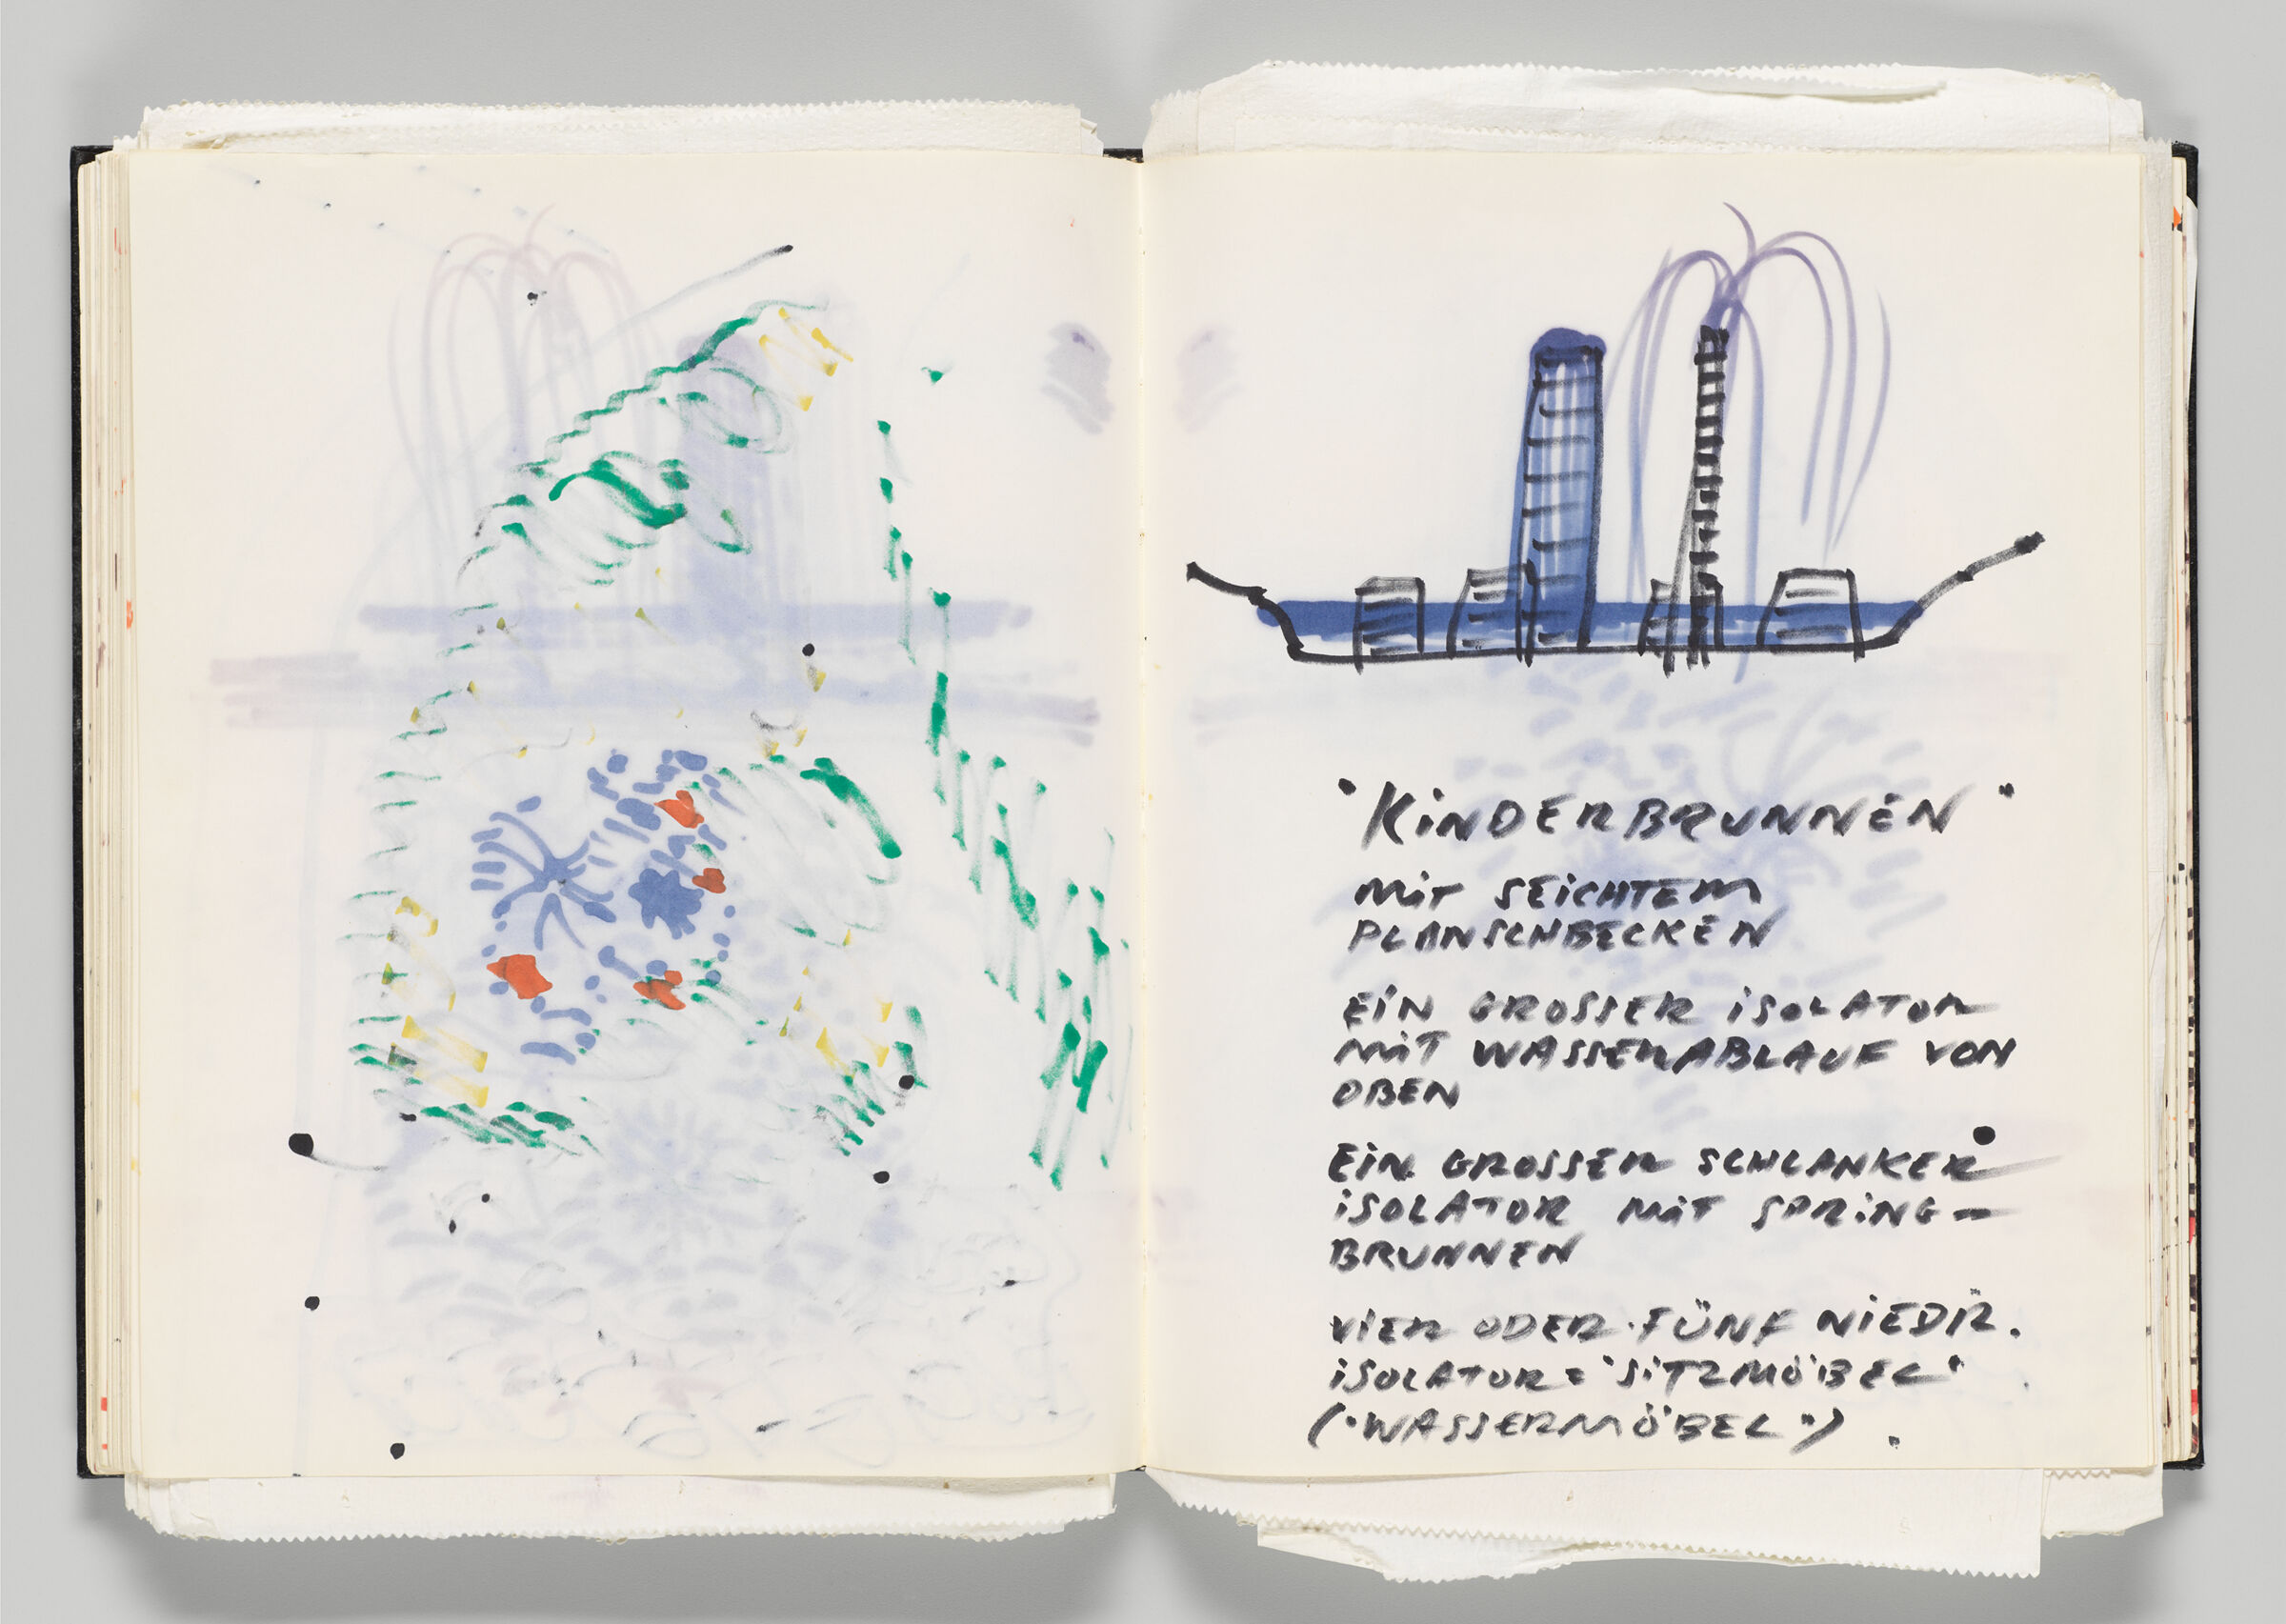 Untitled (Bleed-Through Of Previous Page, Left Page); Untitled (Design For Rosenthal Fountain, Right Page)